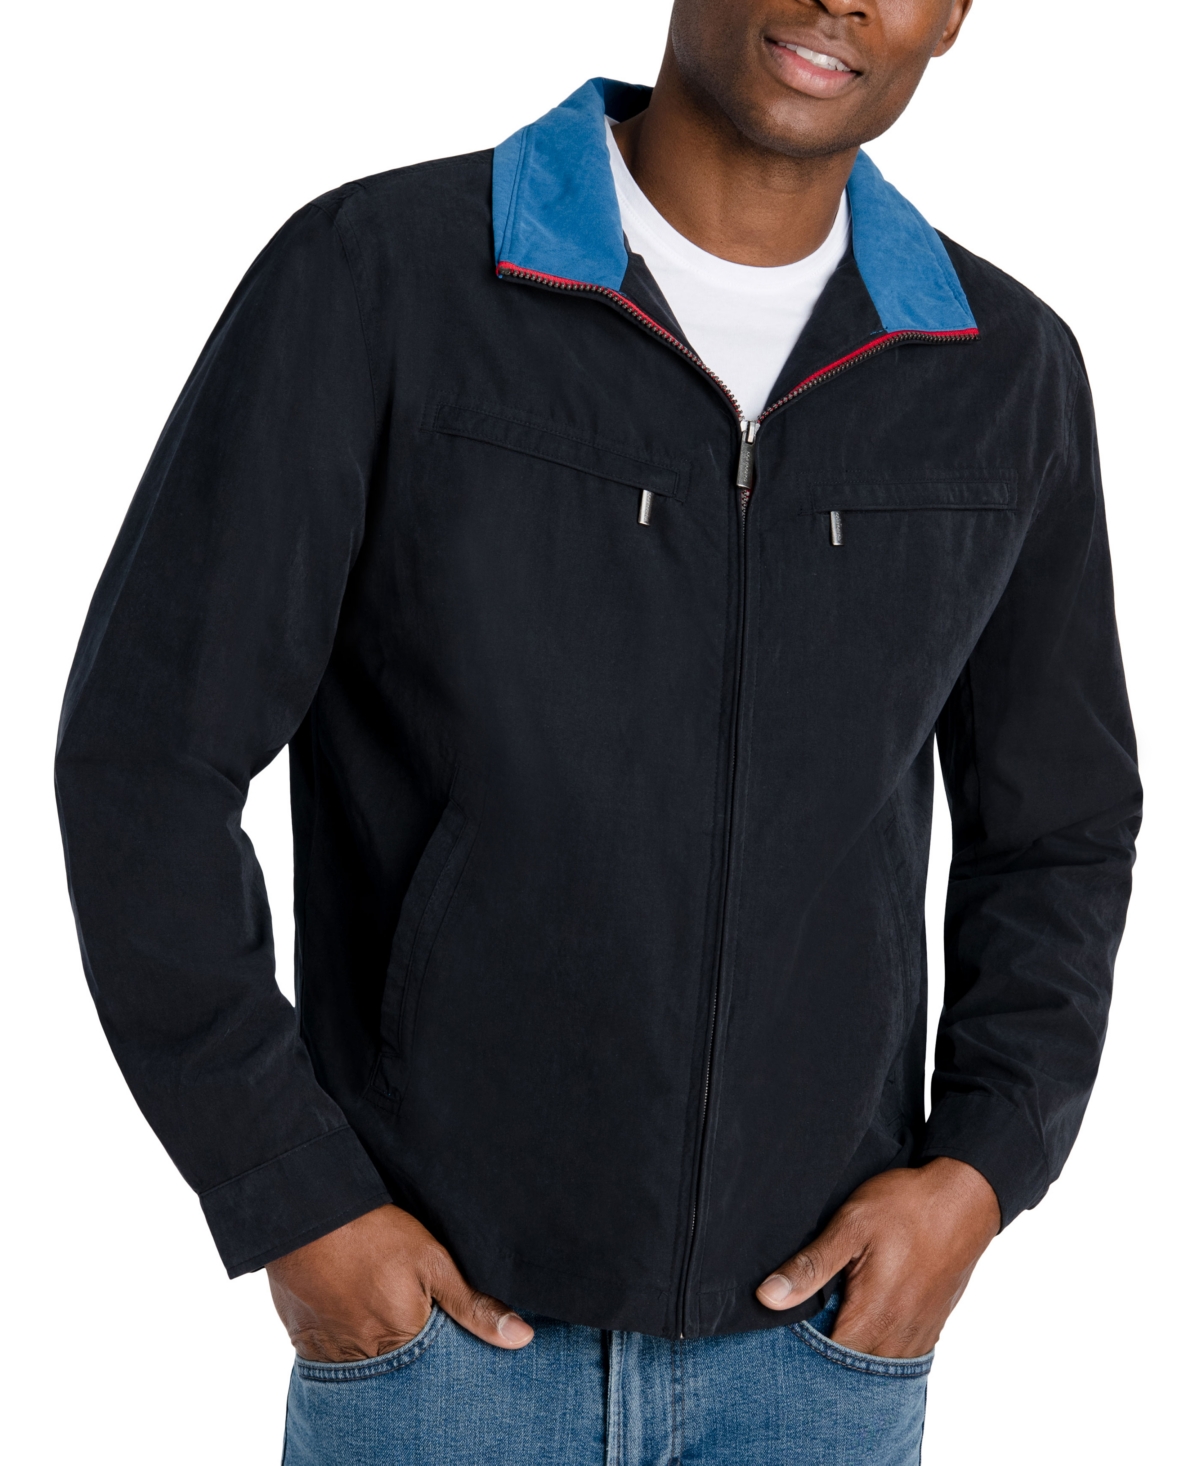 Litchfield Microfiber Jacket, Created for Macy's - Cement